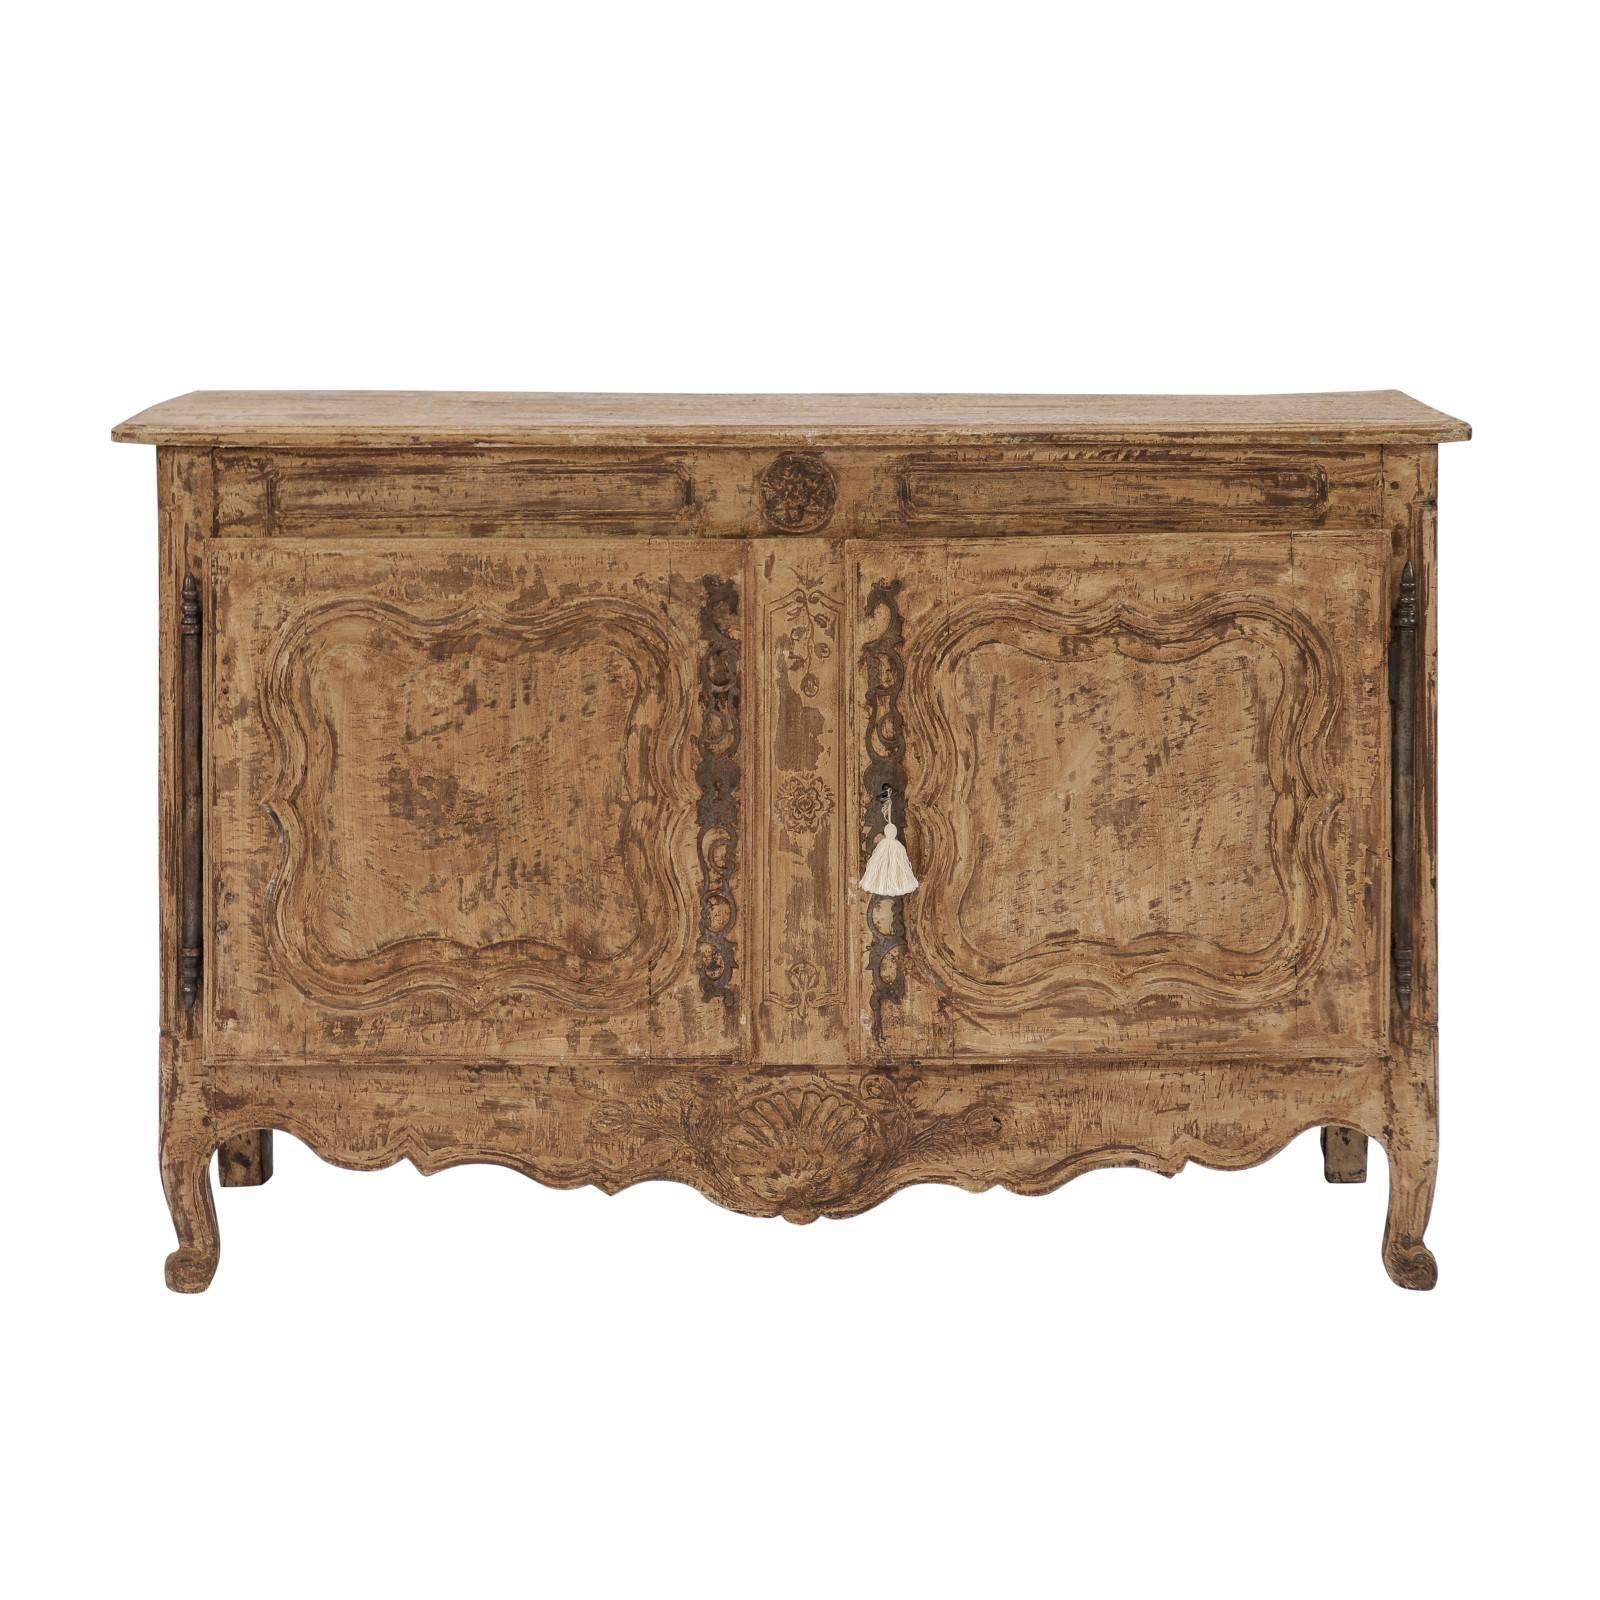 1780s Stripped Wood Two-Door Buffet from the Auvergne Region of France